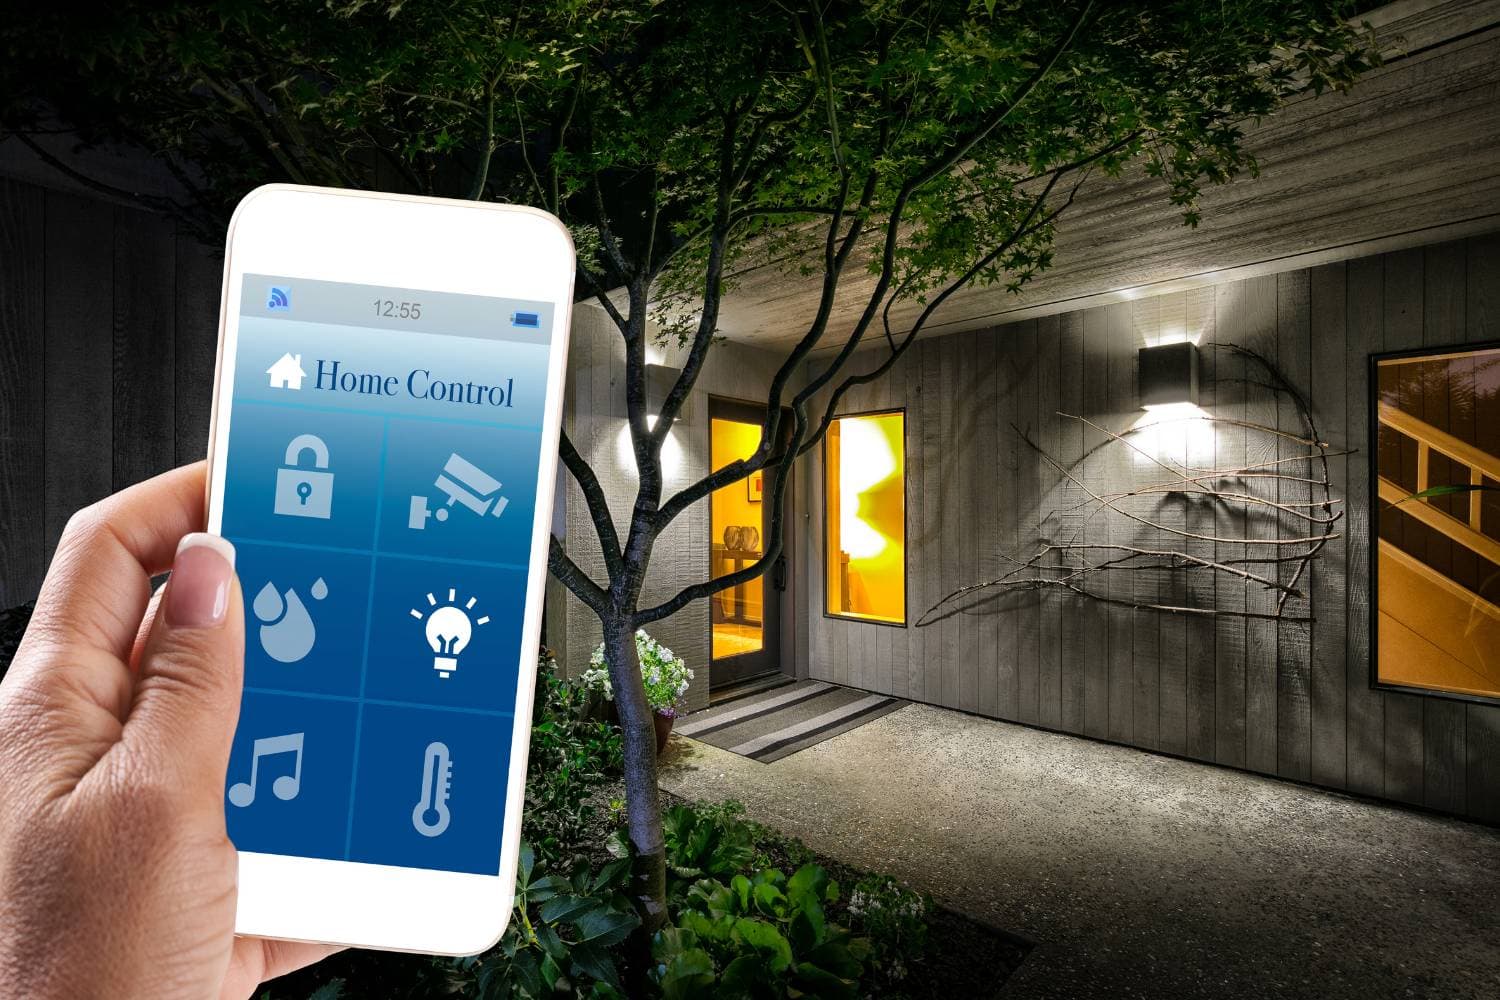 can a home security system be upgraded over time to meet changing needs 2